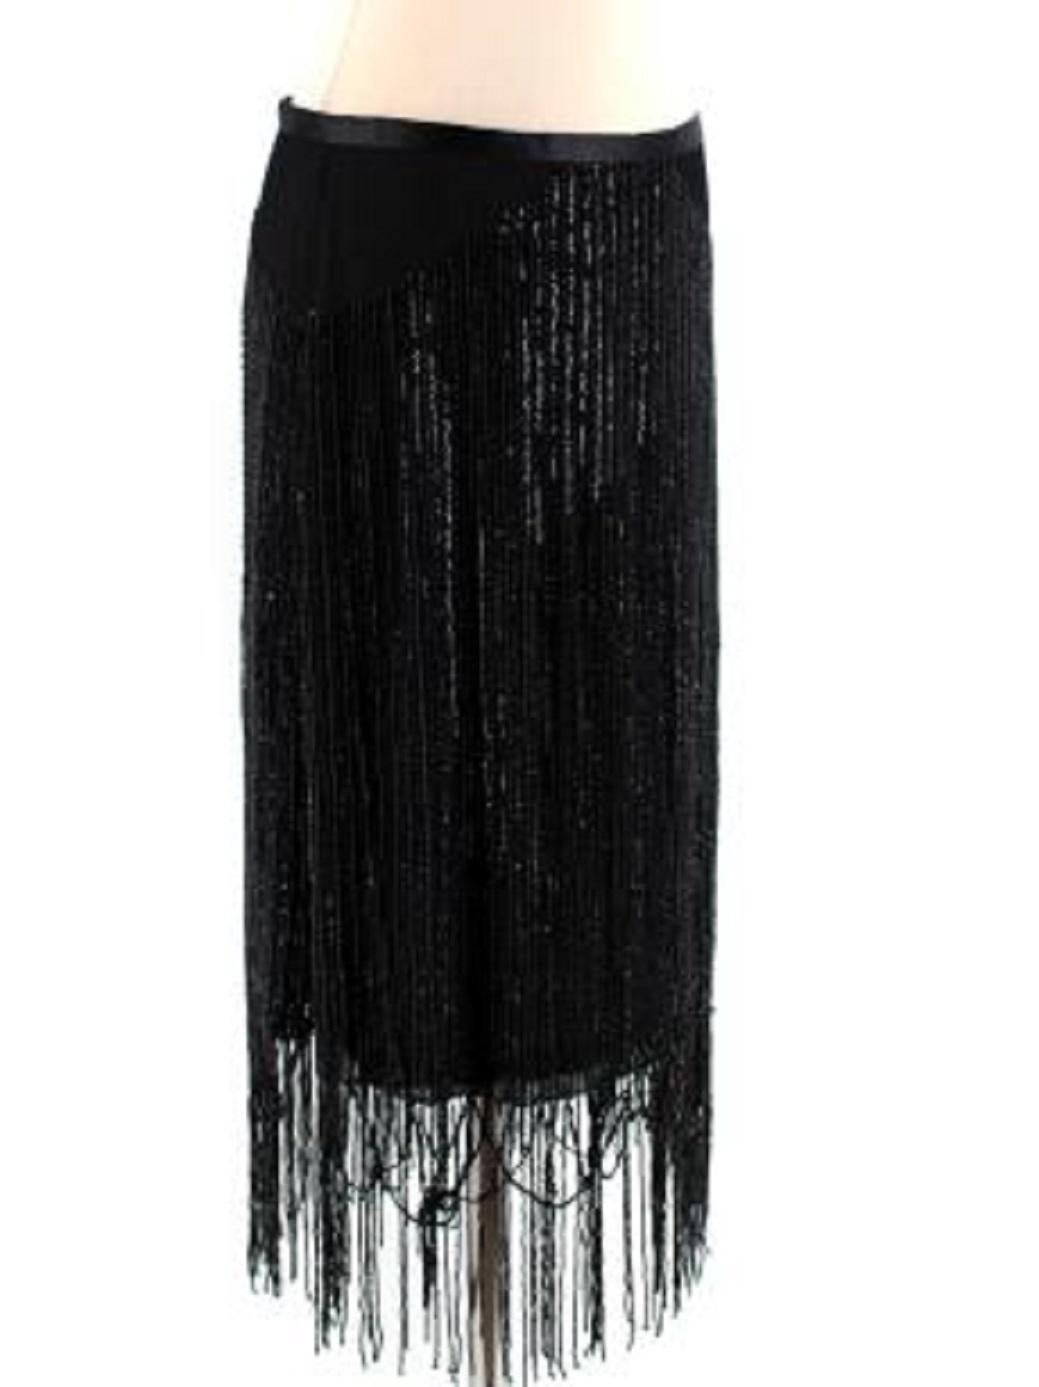 MaxMara Black Sequin Tassel Skirt 

- Low waisted 
- Side popper and button fastening 
- Sequin, tassel detailing 
- Mesh fabric 
- Mid-length 

Materials:
- 35% Virgin Wool
- 35% Cotton
- 25% Viscose 
- 5% Elastane 

Dry clean only 

Made in Italy